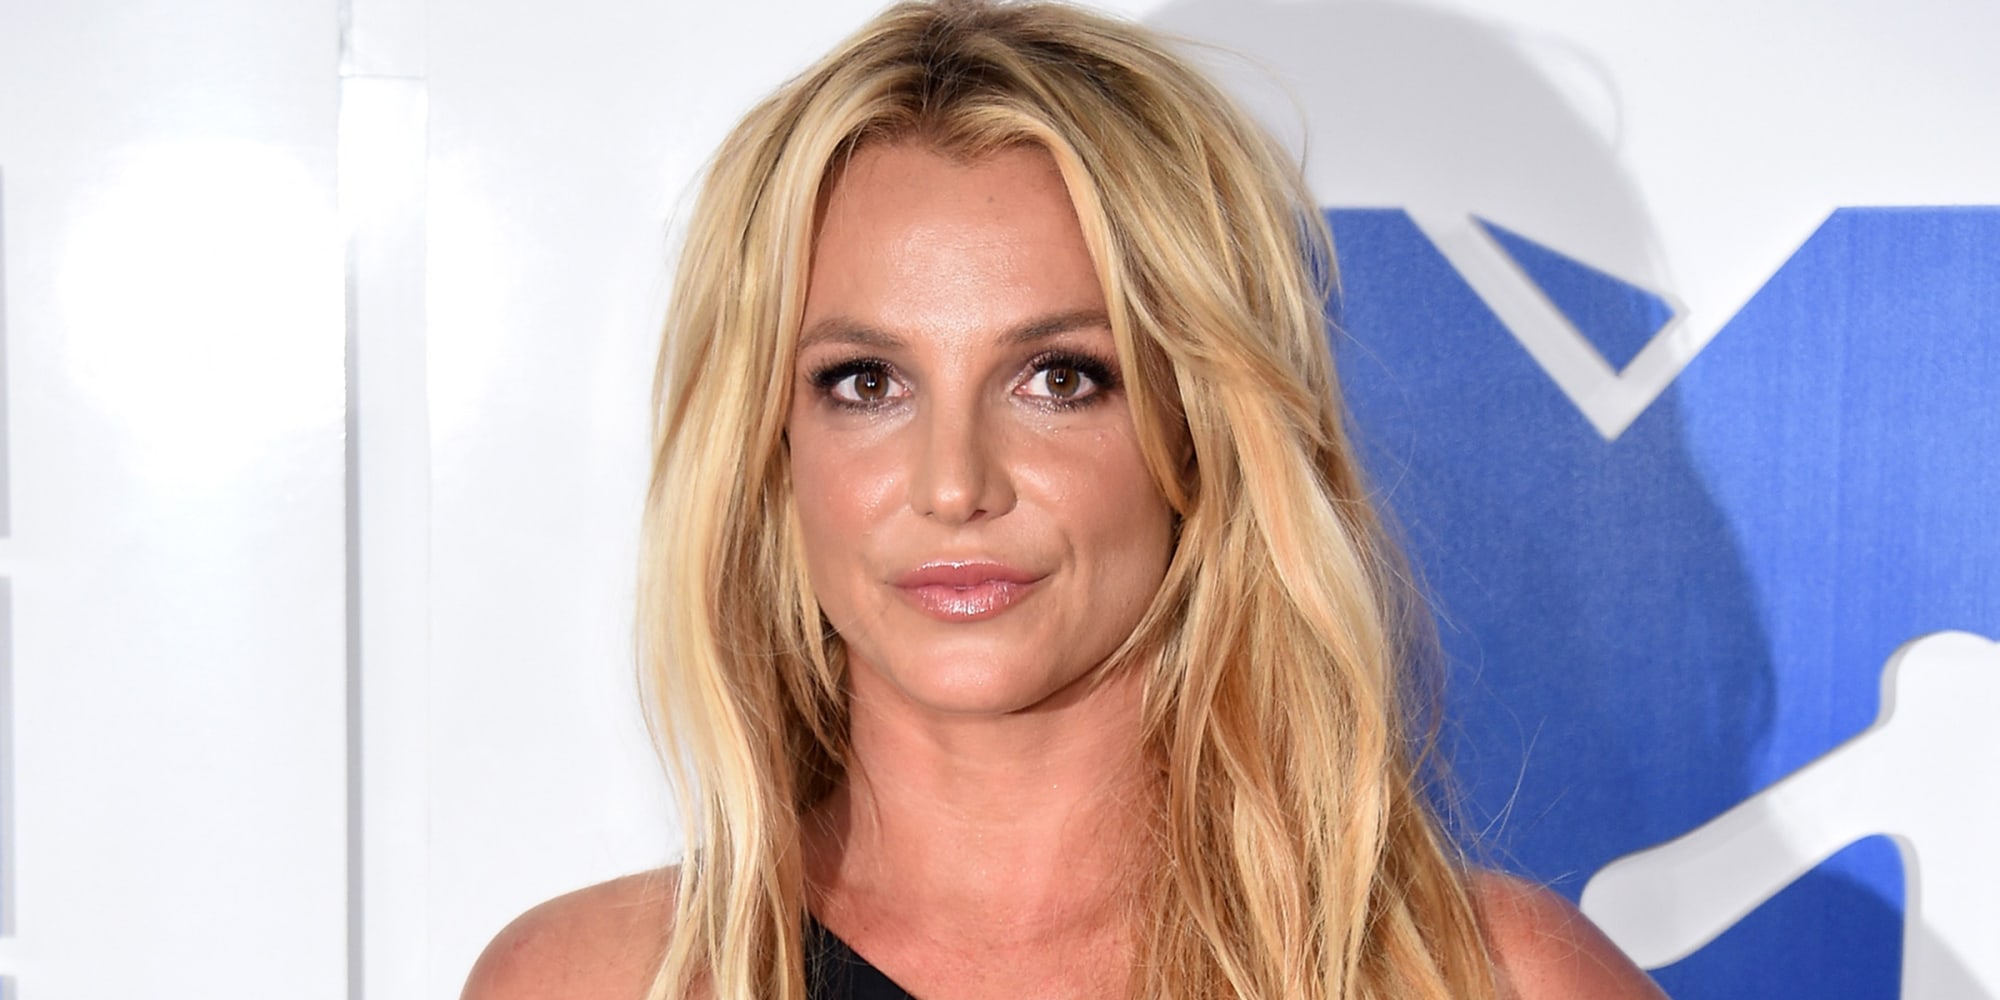 Britney Spears’ New Attorney Files Petition to Appoint CPA as Conservator of Her Estate